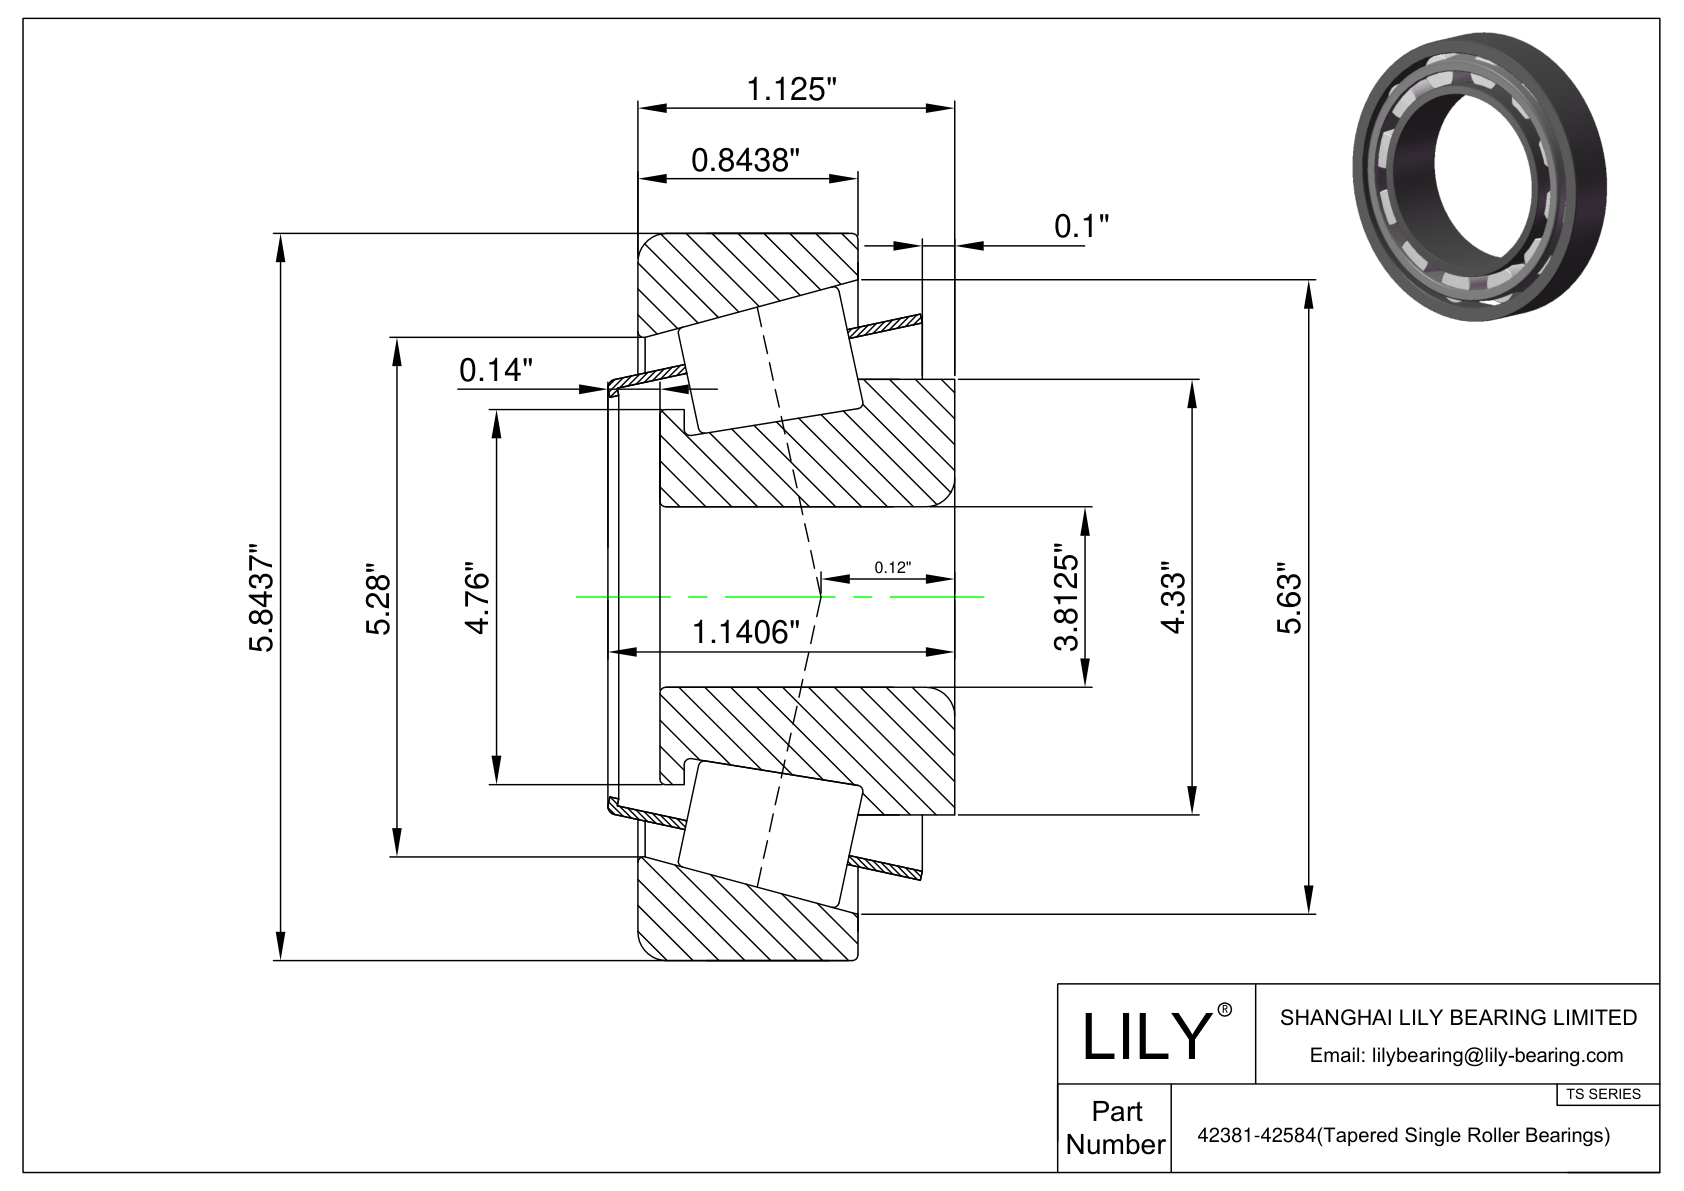 42381-42584 TS (Tapered Single Roller Bearings) (Imperial) cad drawing